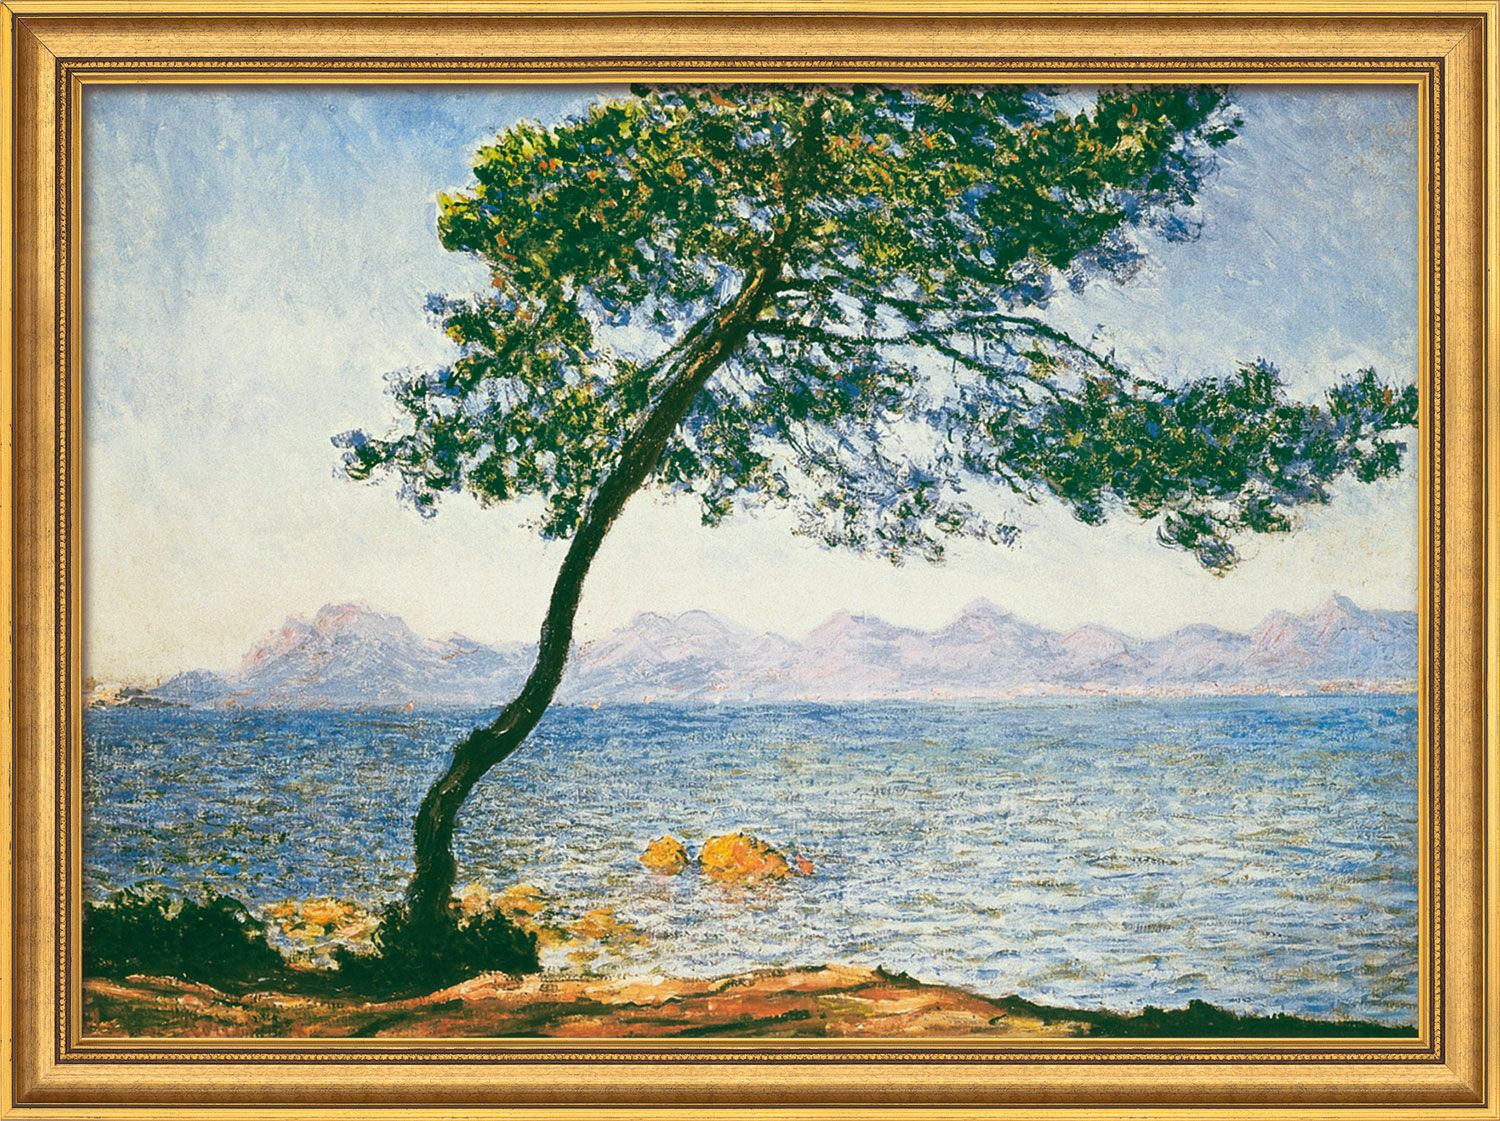 Picture "Antibes" (1888), framed by Claude Monet